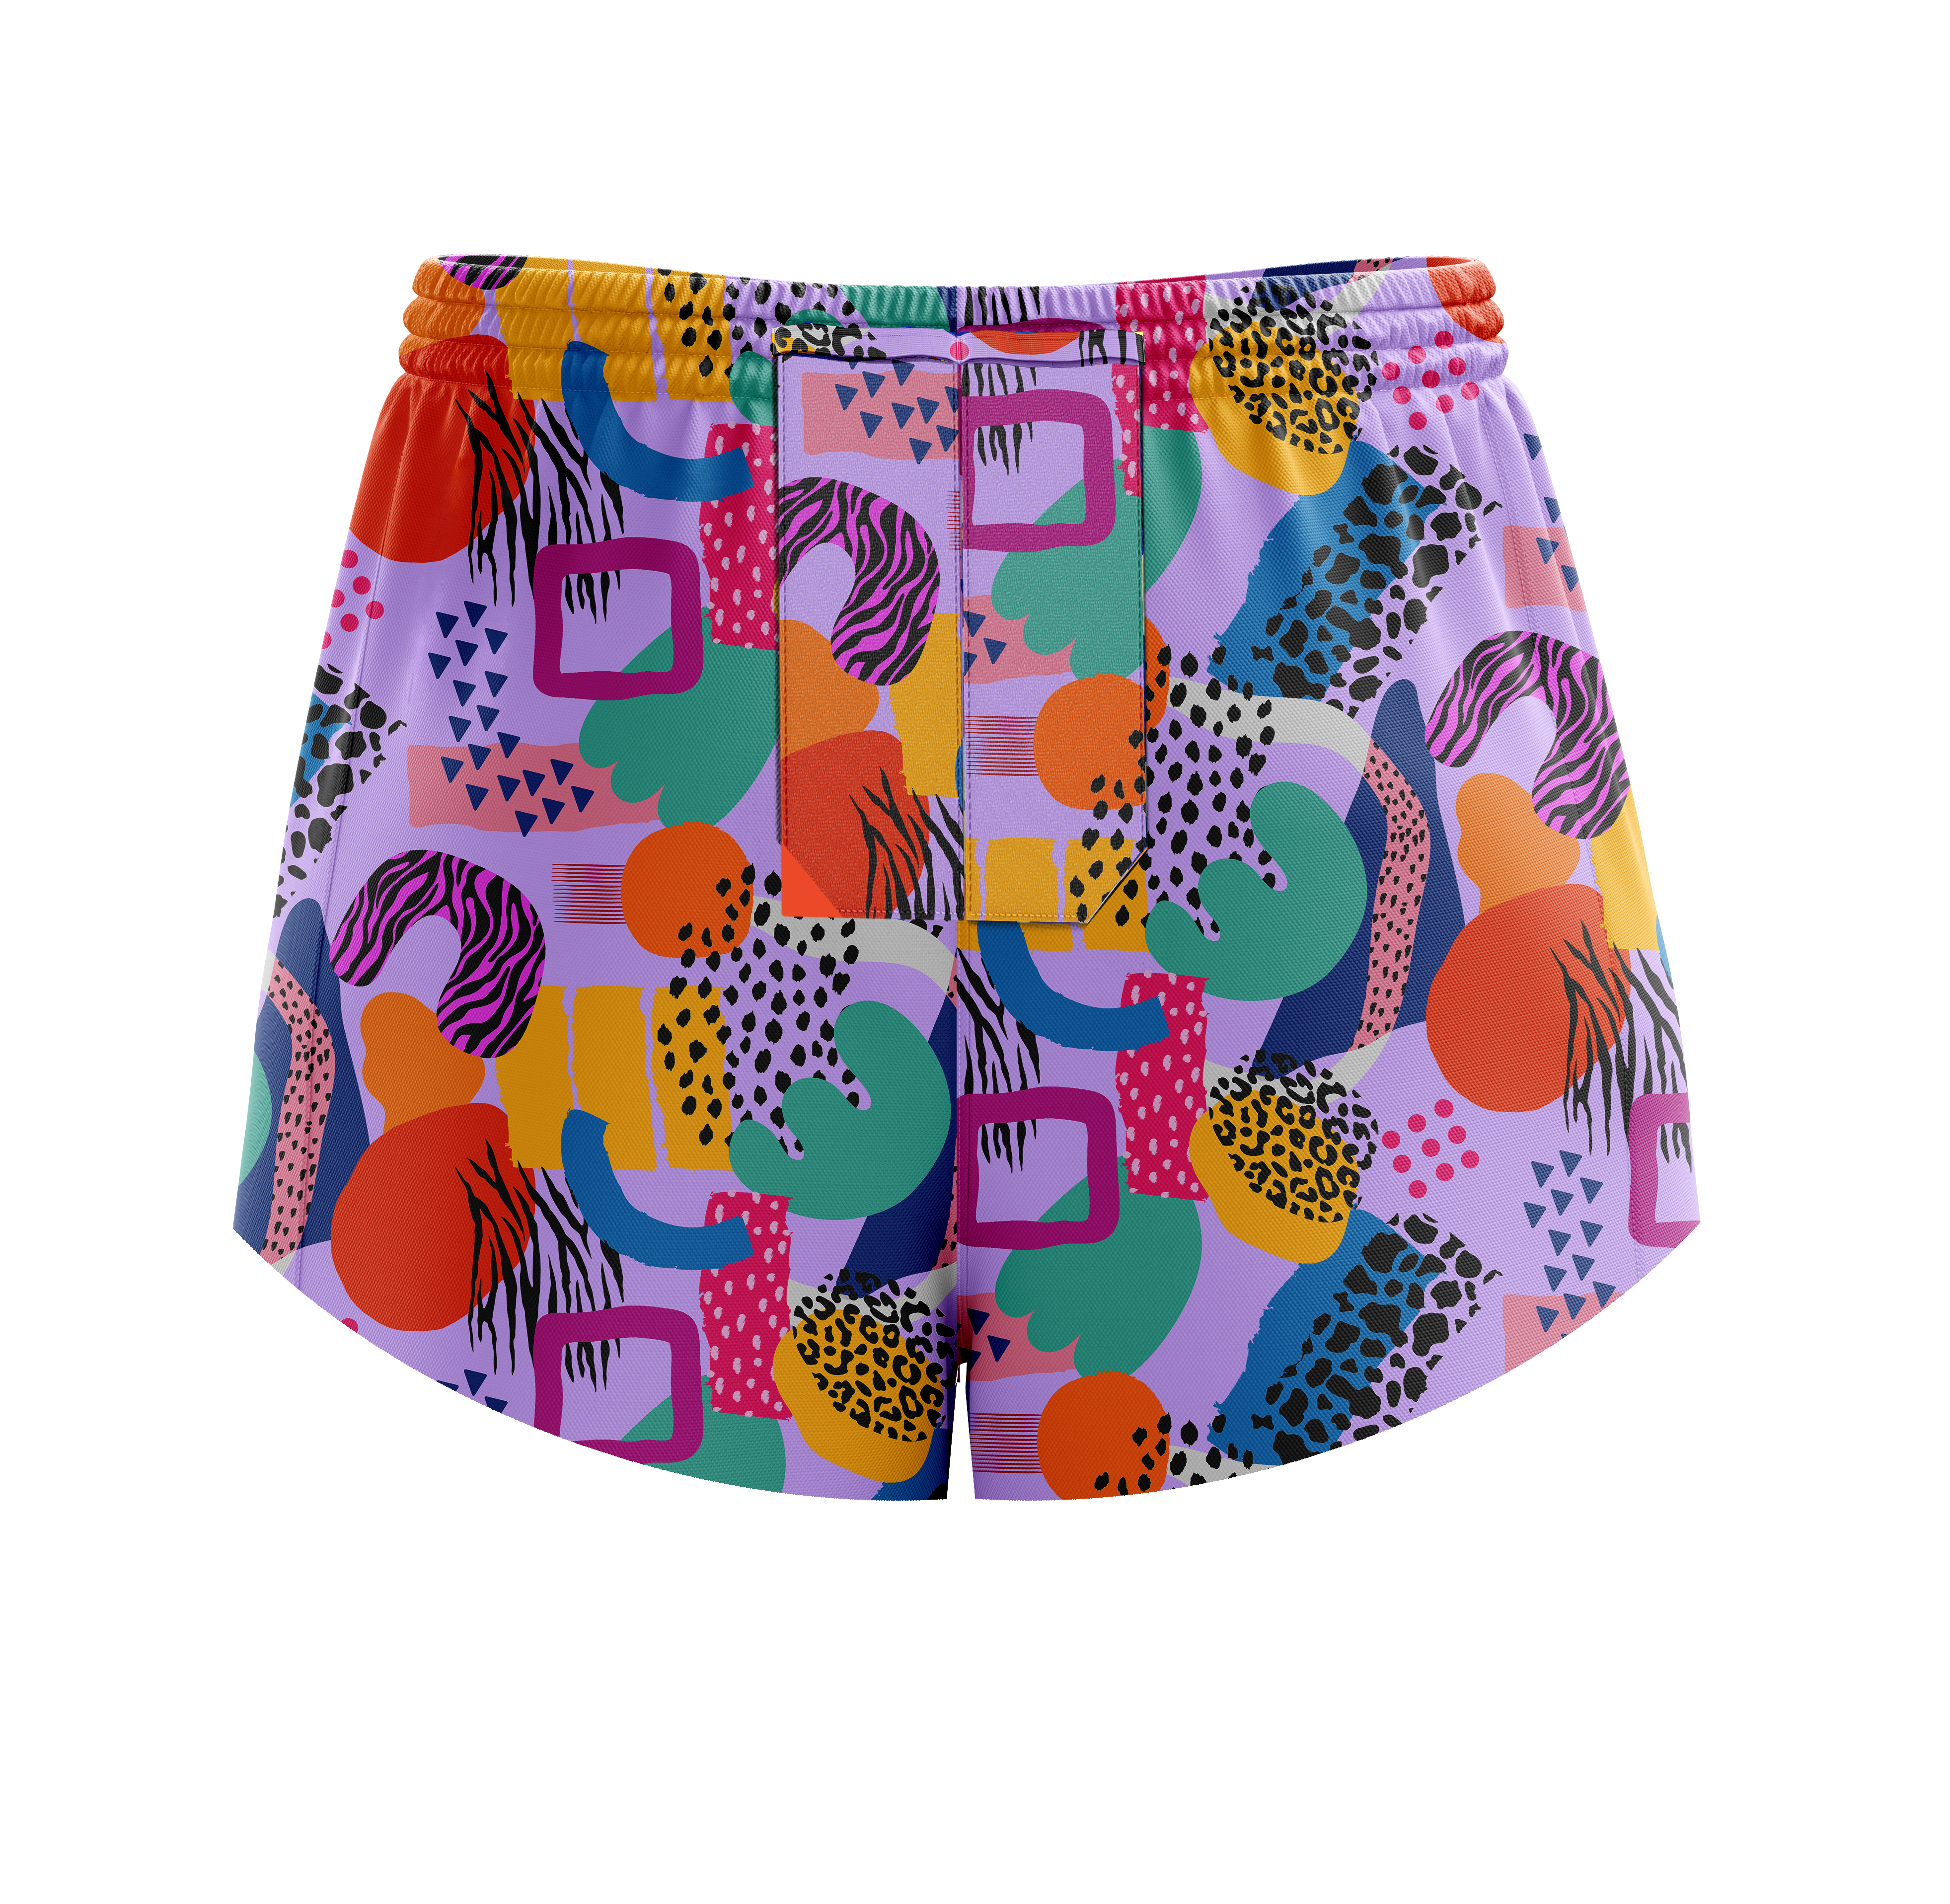 ''We like to party'' racer shorts